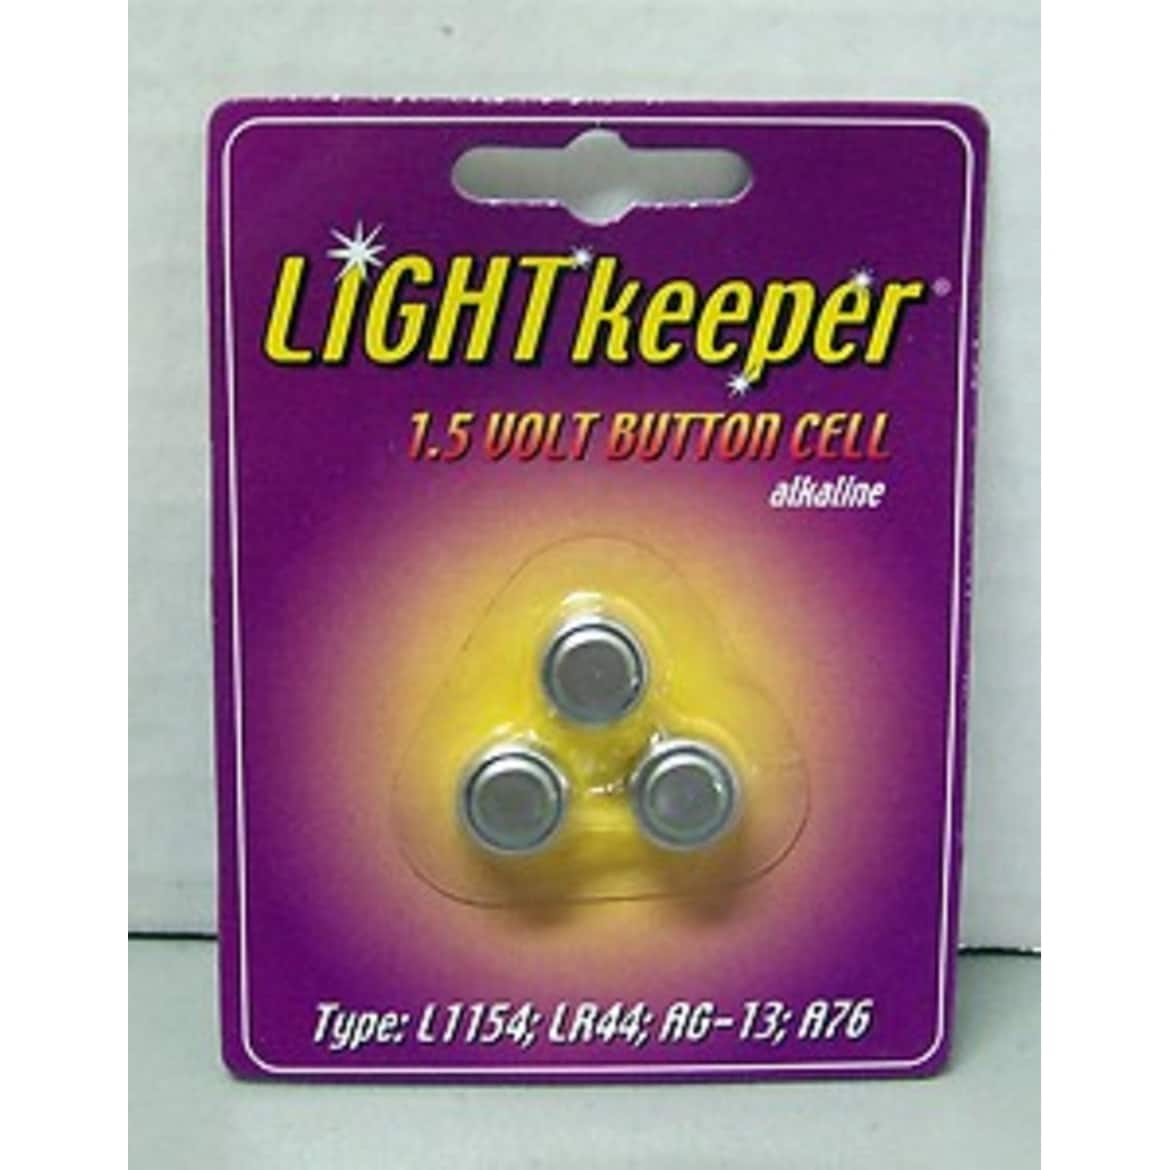 https://ak1.ostkcdn.com/images/products/is/images/direct/9704844f753ee683b0bc46f373c3174ee3a08ec8/Pack-of-3-Light-Keeper-Pro-1.5-Volt-Button-Cell-Replacement-Batteries.jpg